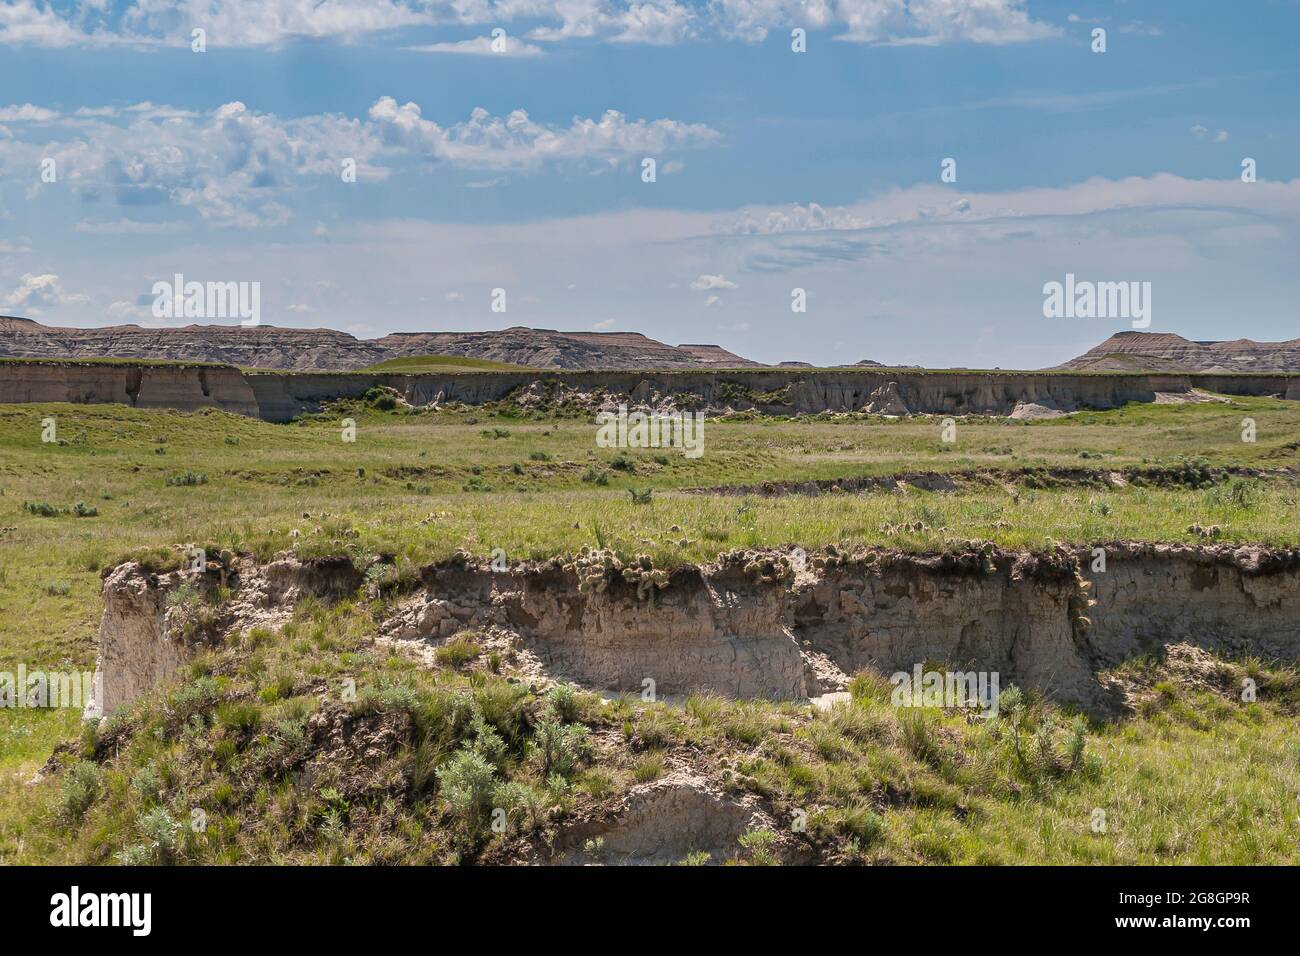 Badlands National Park, SD, USA - June 1, 2008: Closeup of small white-gray geologic table in green prairie with bigger such ridge on horizon under bl Stock Photo